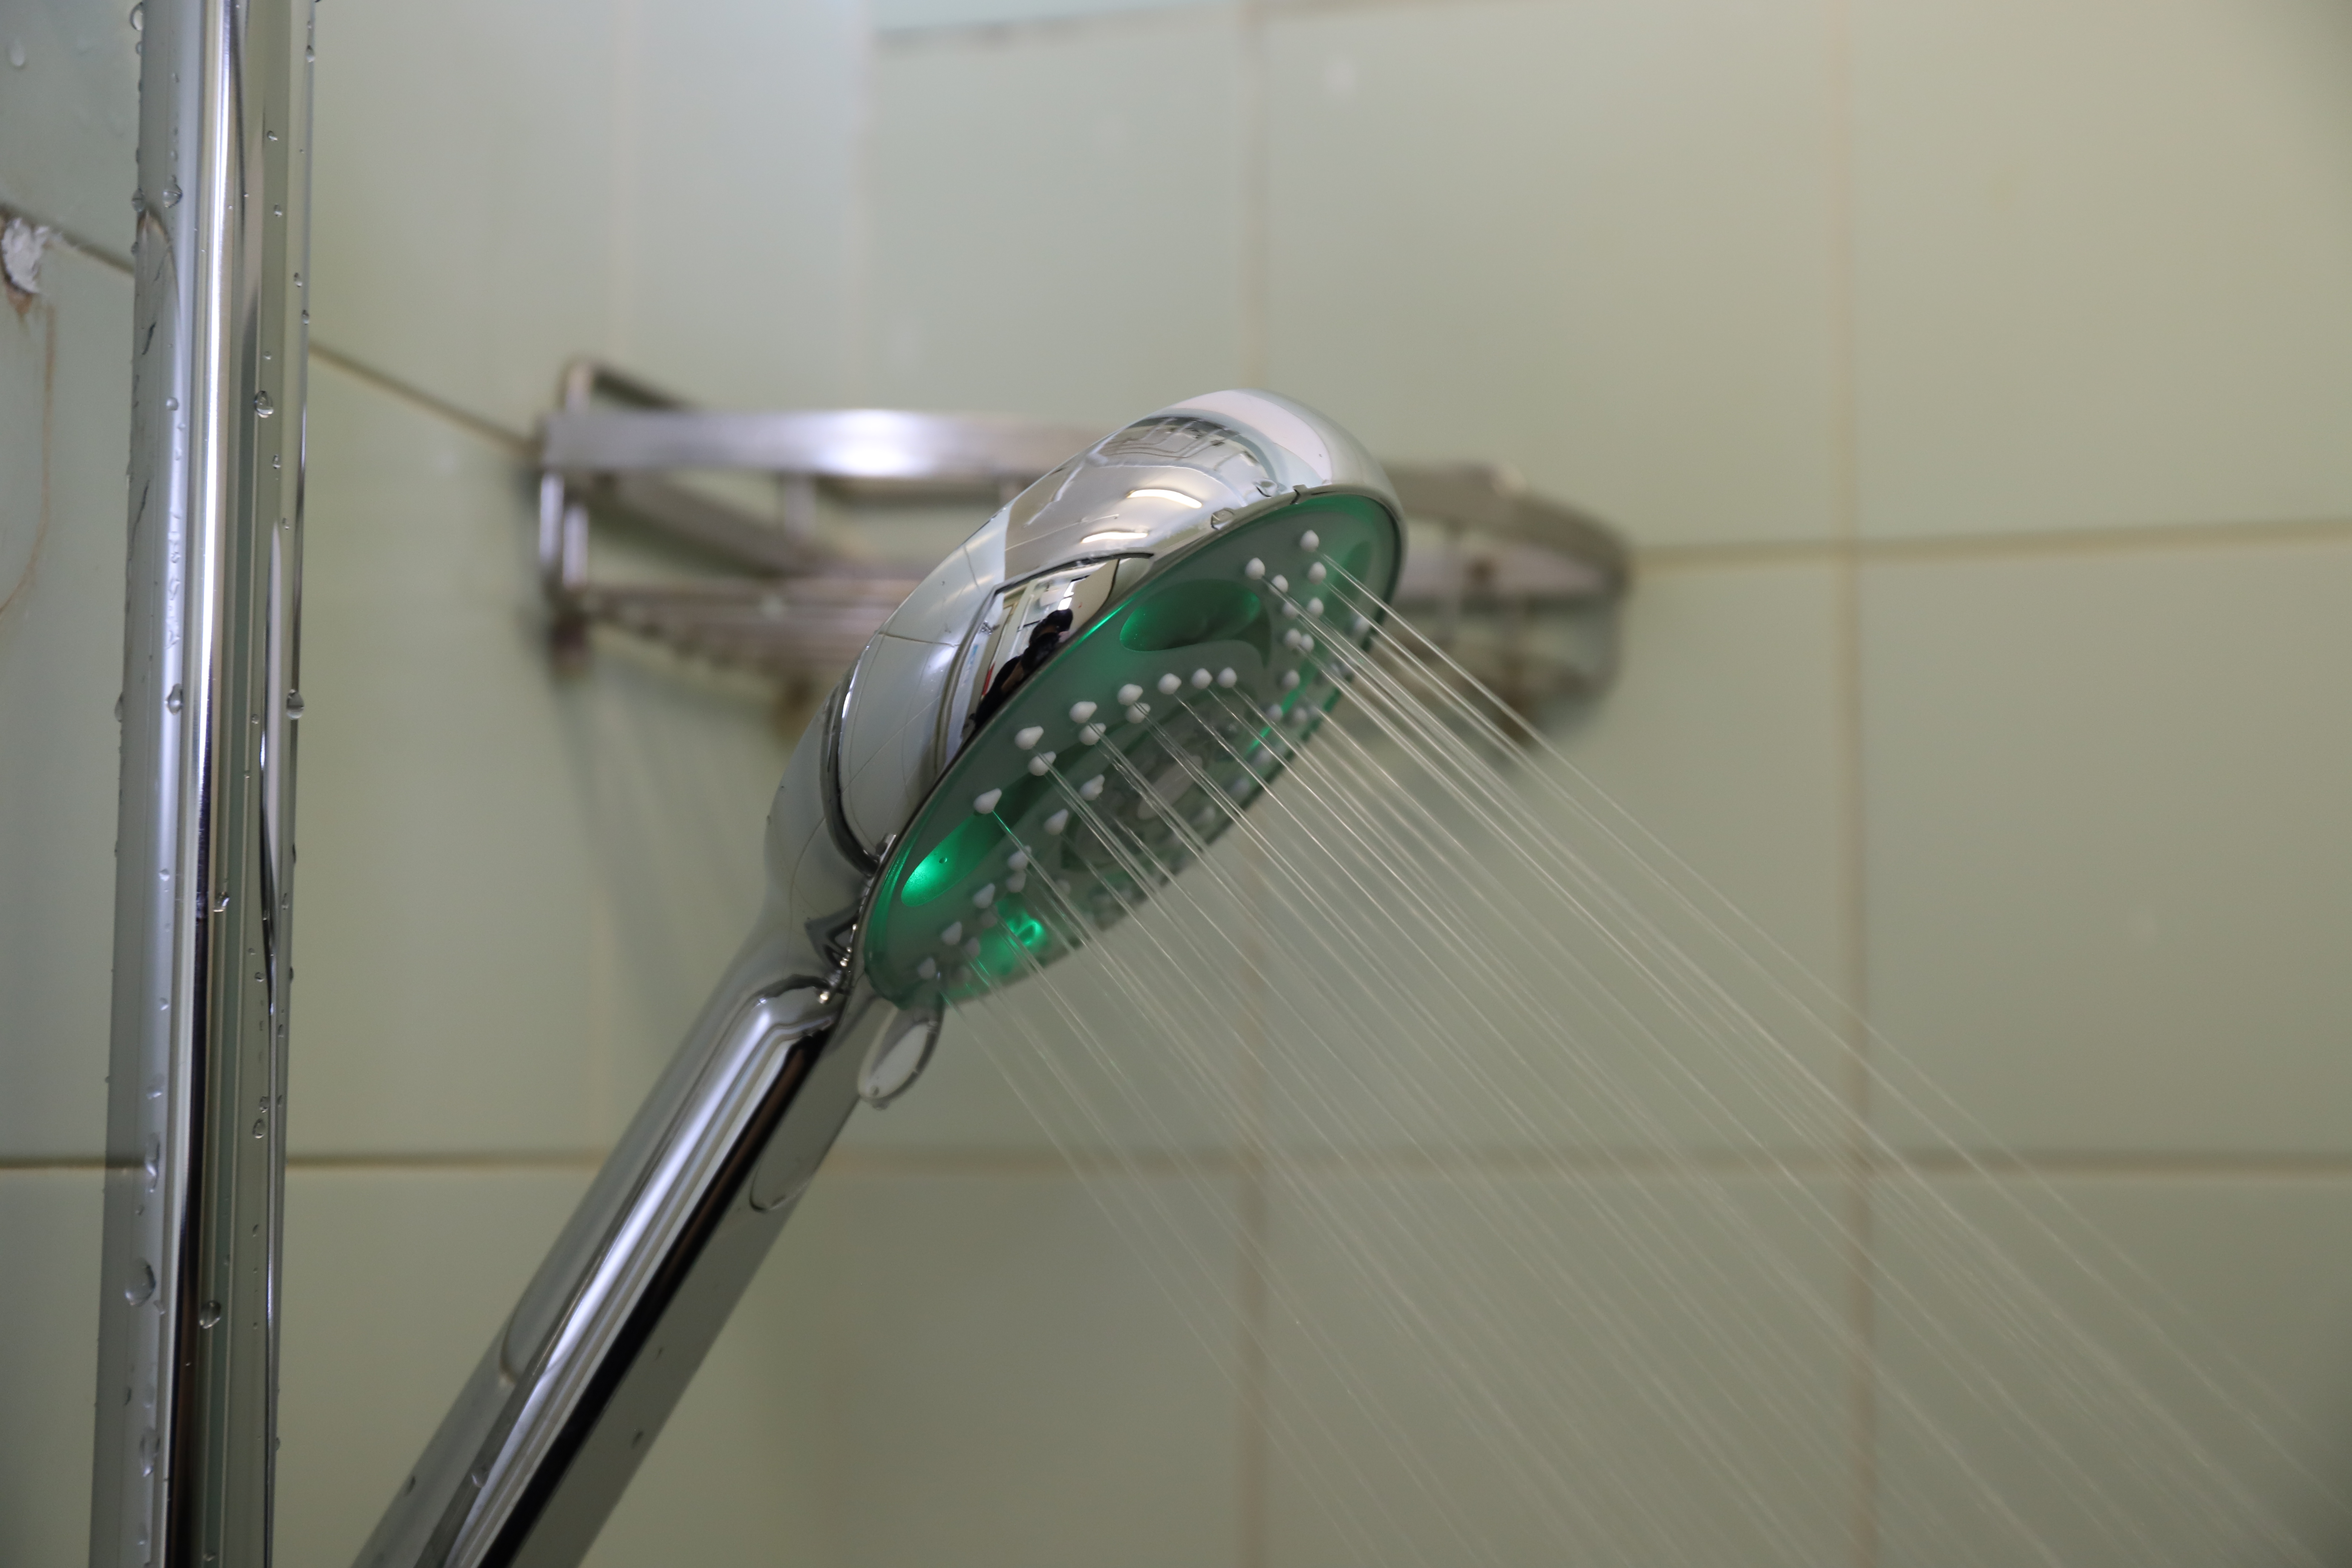 Smart showerhead with green light on.